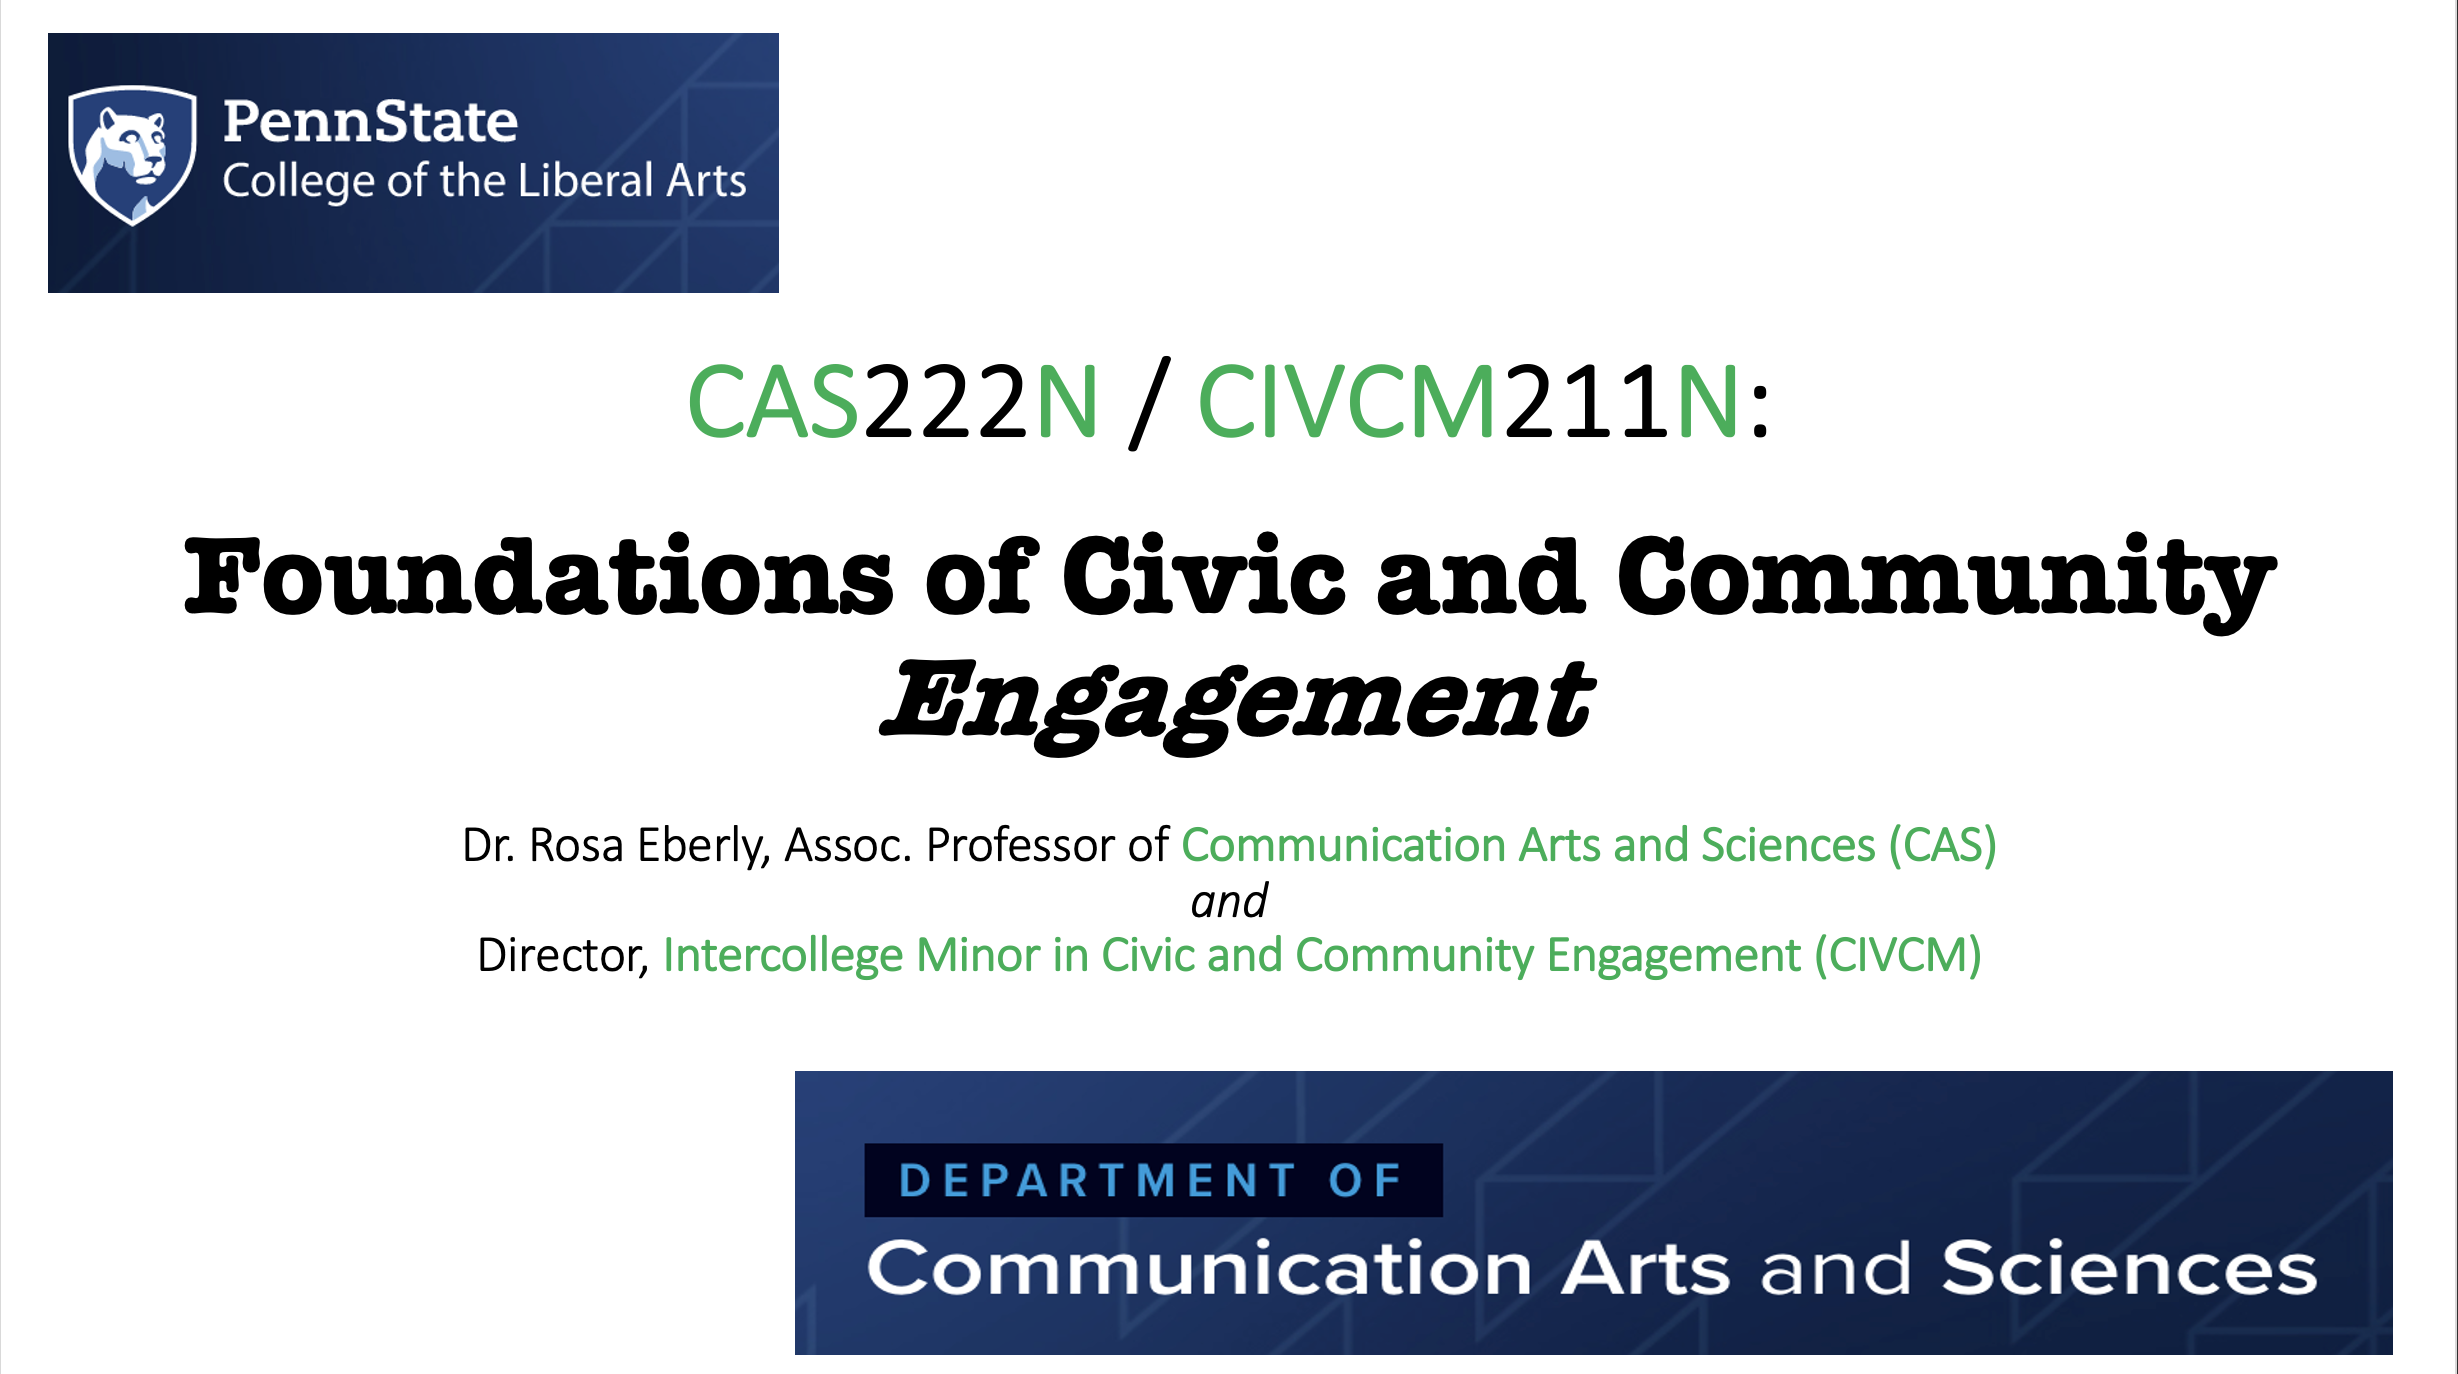 Introductory slide from Dr. Eberly’s lecture indicating her topic will be CAS222N/CIVCM 211N: Foundations of Civic and Community Engagement